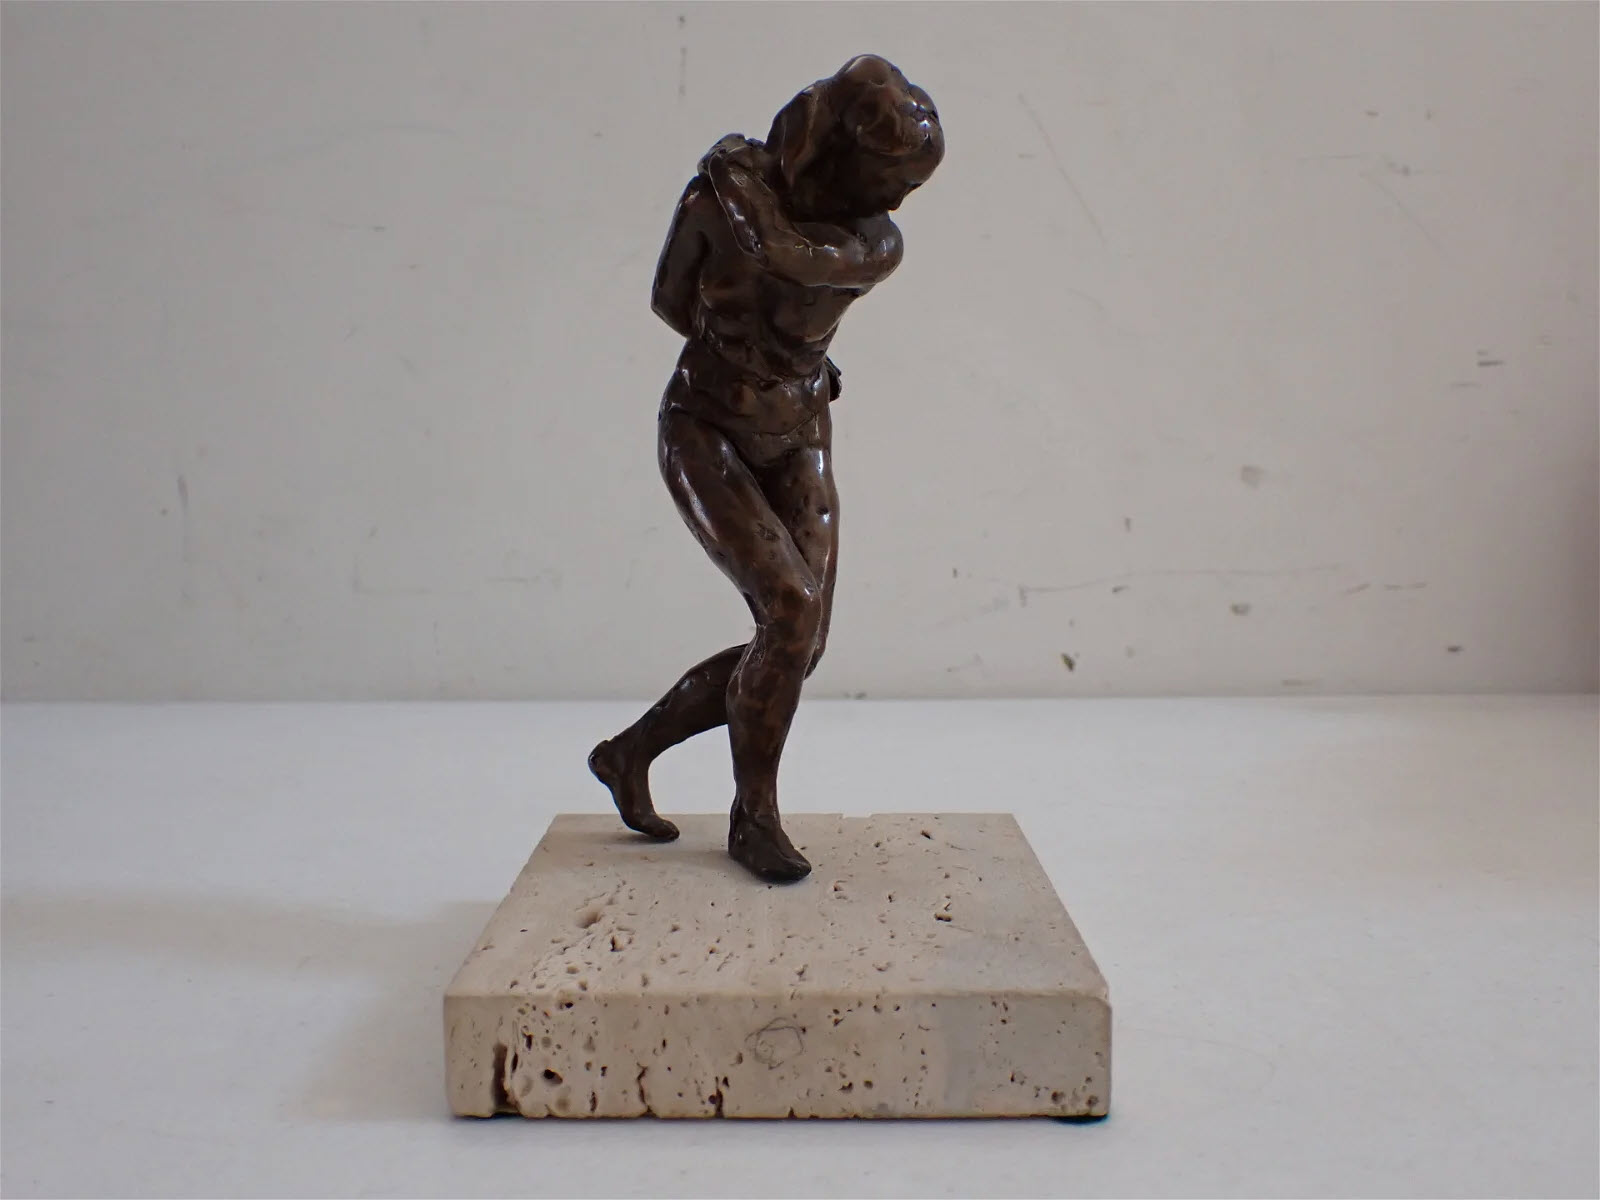 Robert Winthrop White Dancer Bronze Sculpture 1984 - sold at auction for $750 from Boston estate